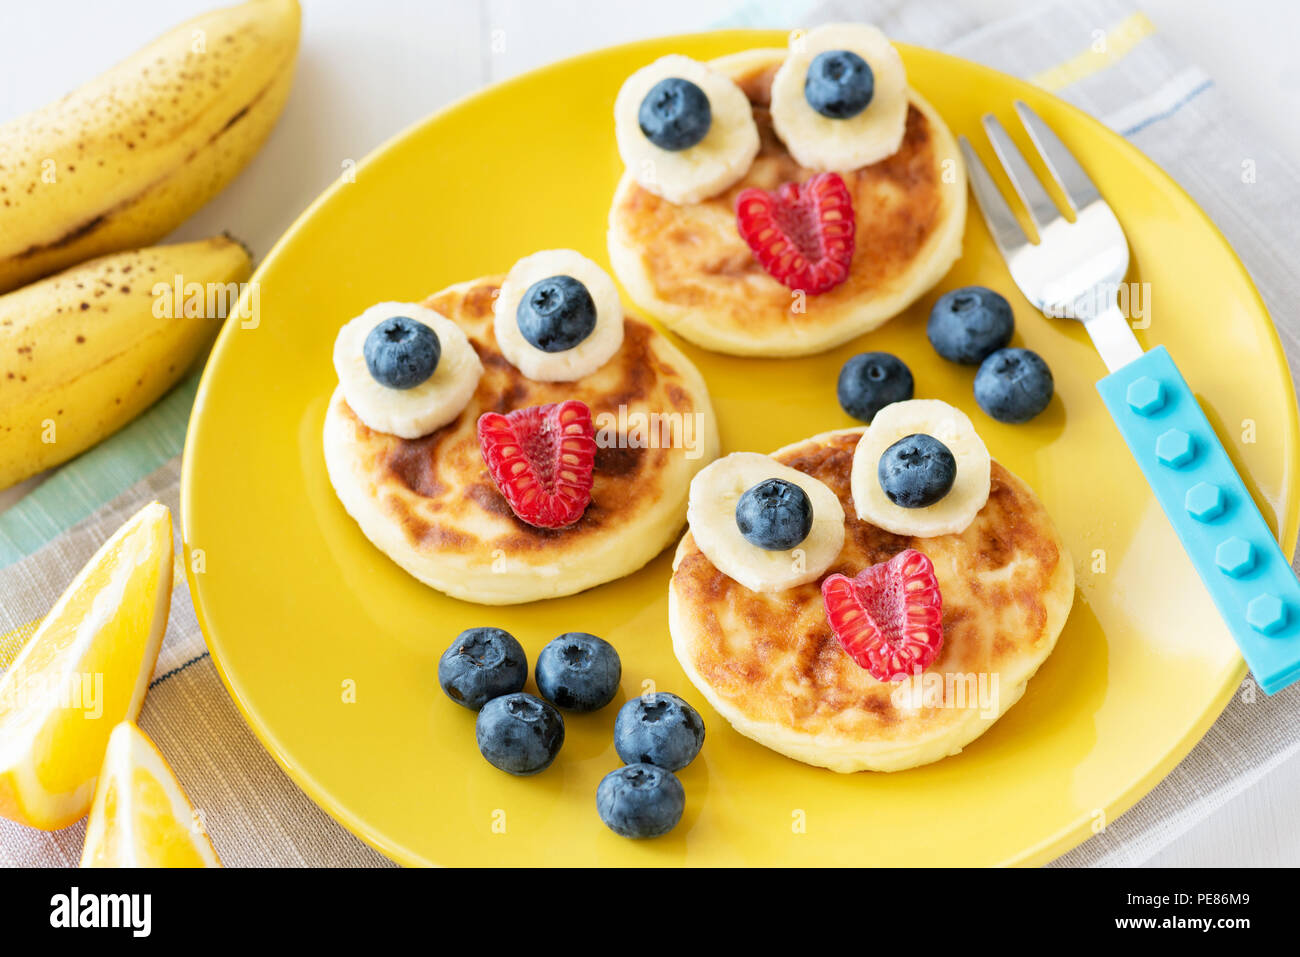 Funny Healthy Breakfast For Kids. Colorful Children Food Menu On Yellow Plate Stock Photo